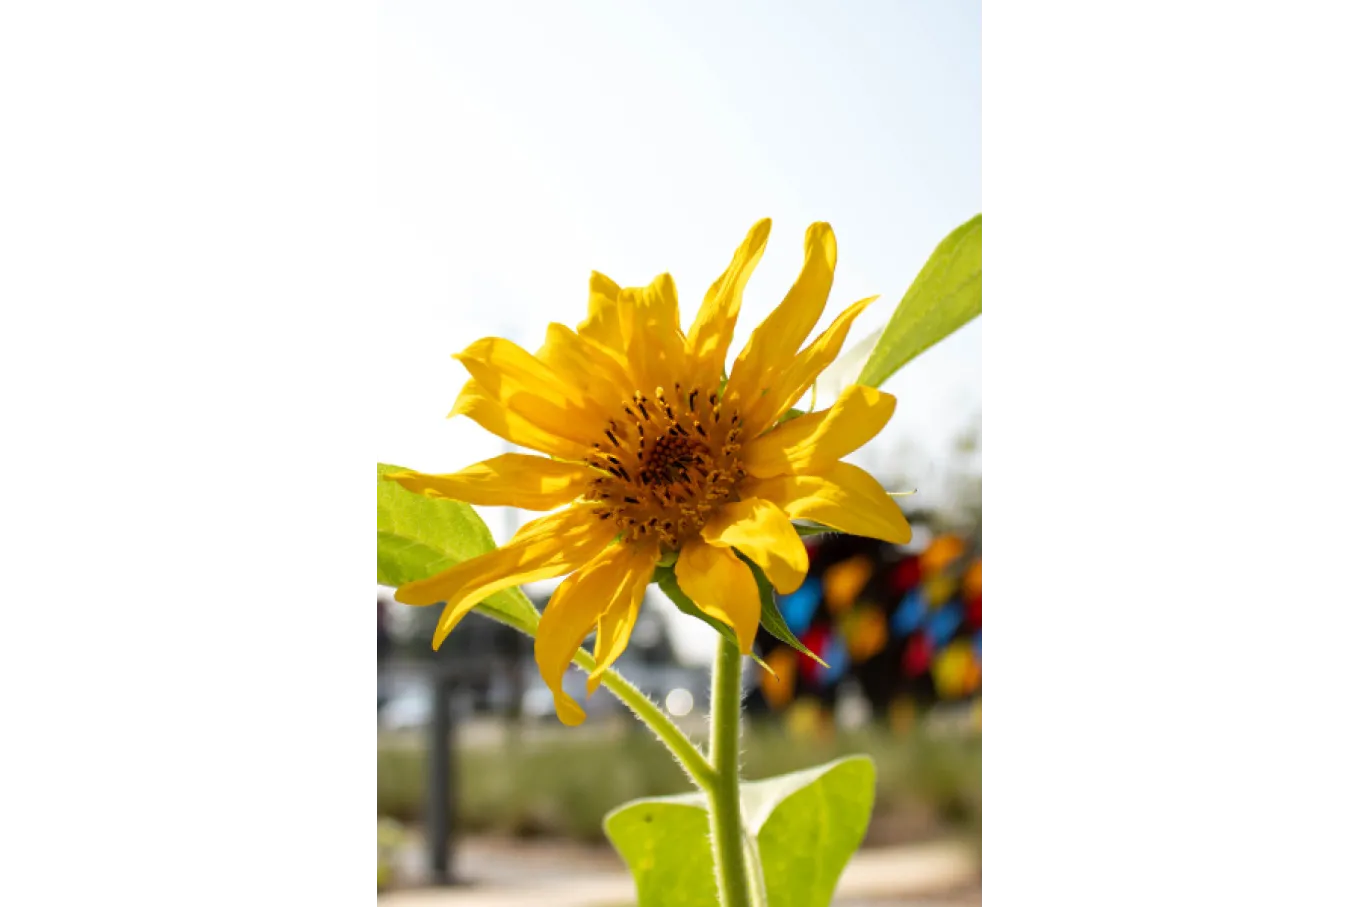 Yellow sunflower reaches for a blue sky in the garden at Richland Library St. Andrews. The Public Art can be seen in the background.